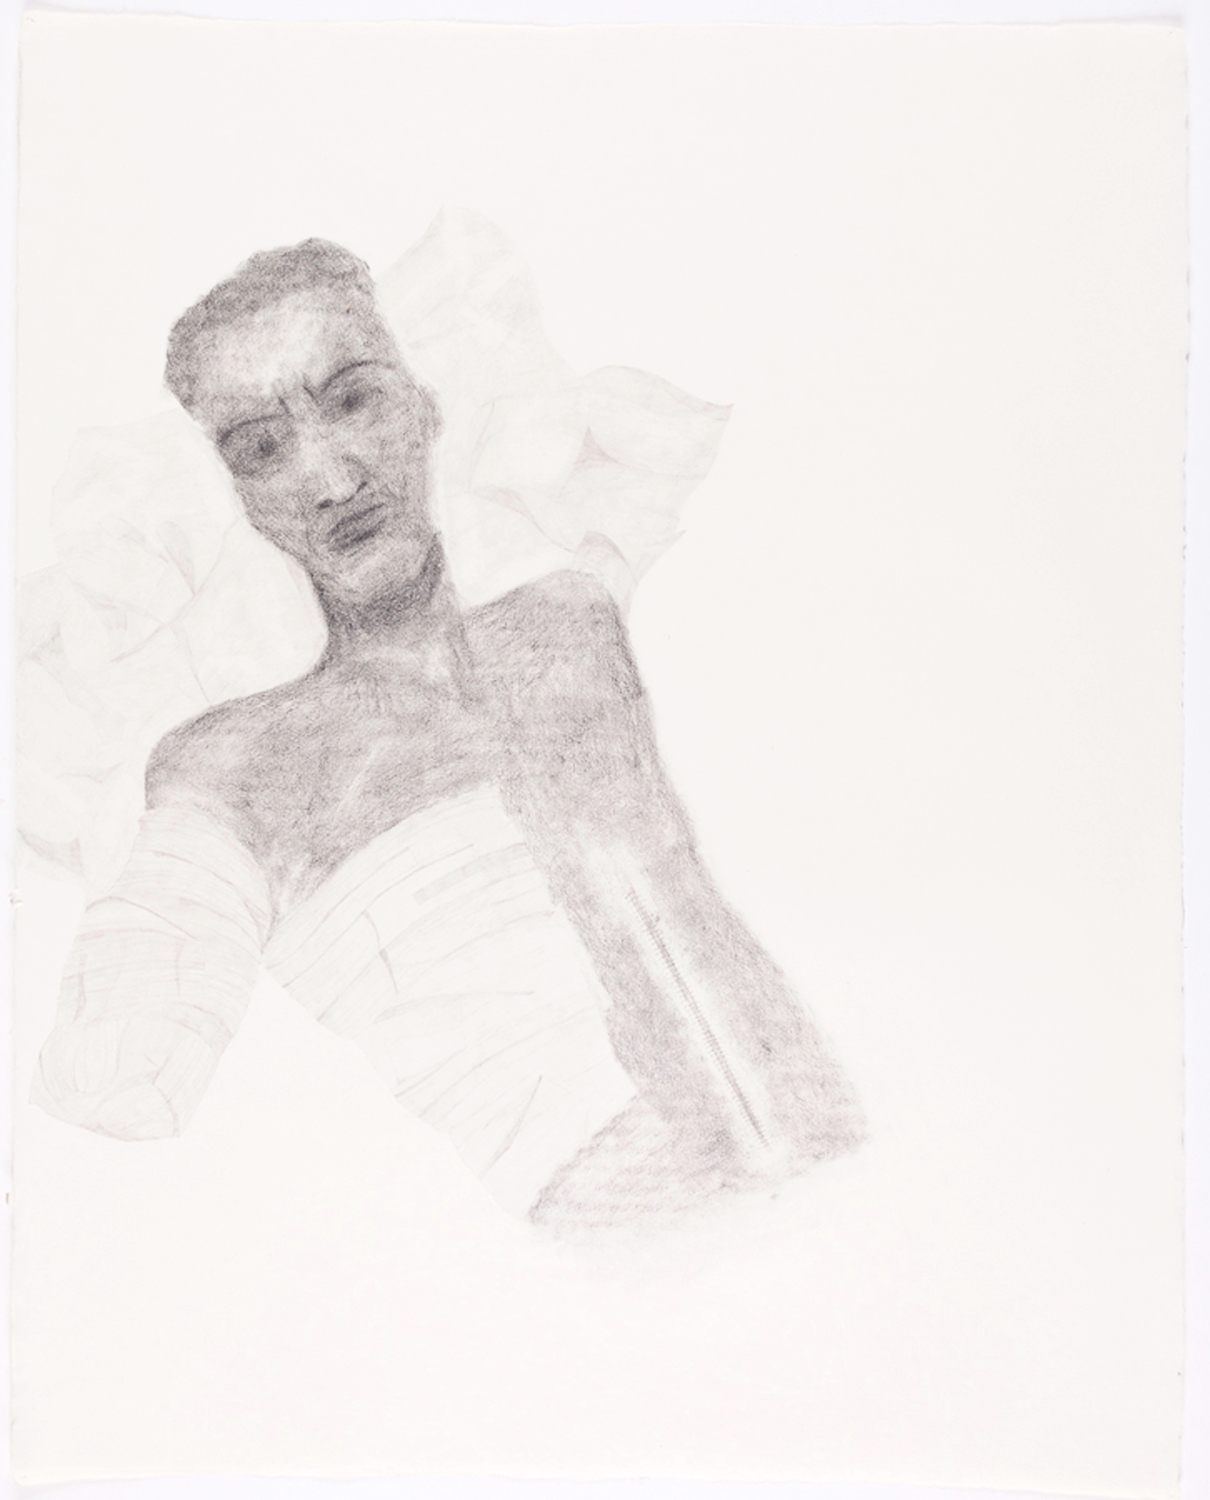  Bandaged Soldier II. 2010. Pencil on Paper. 30" x 22" 